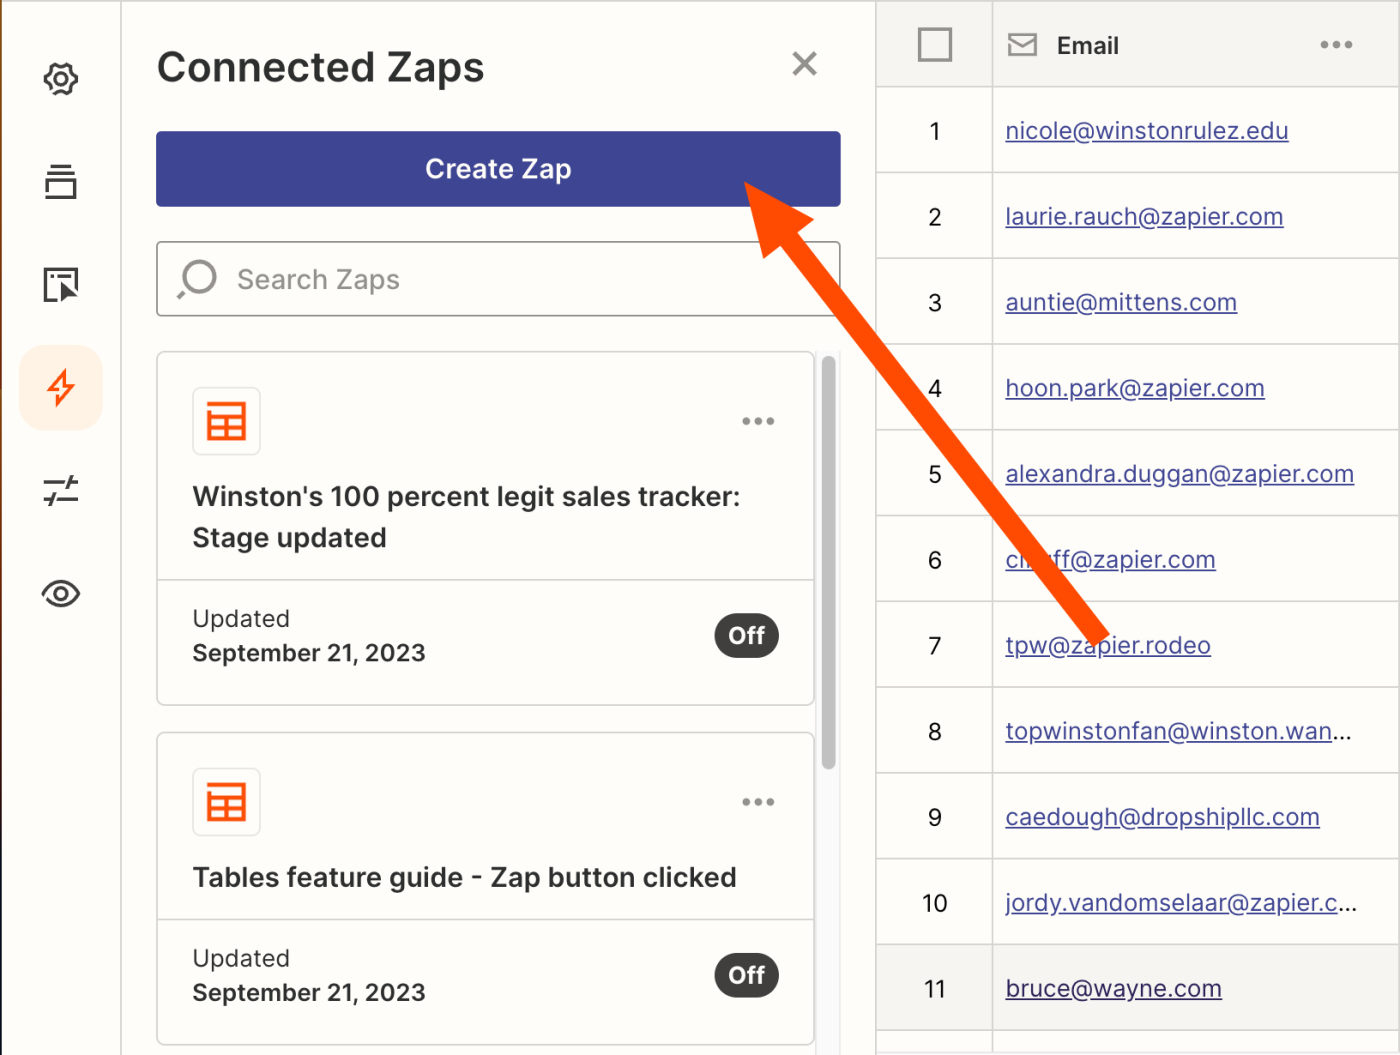 Click Create Zap from the Connected Zaps pane